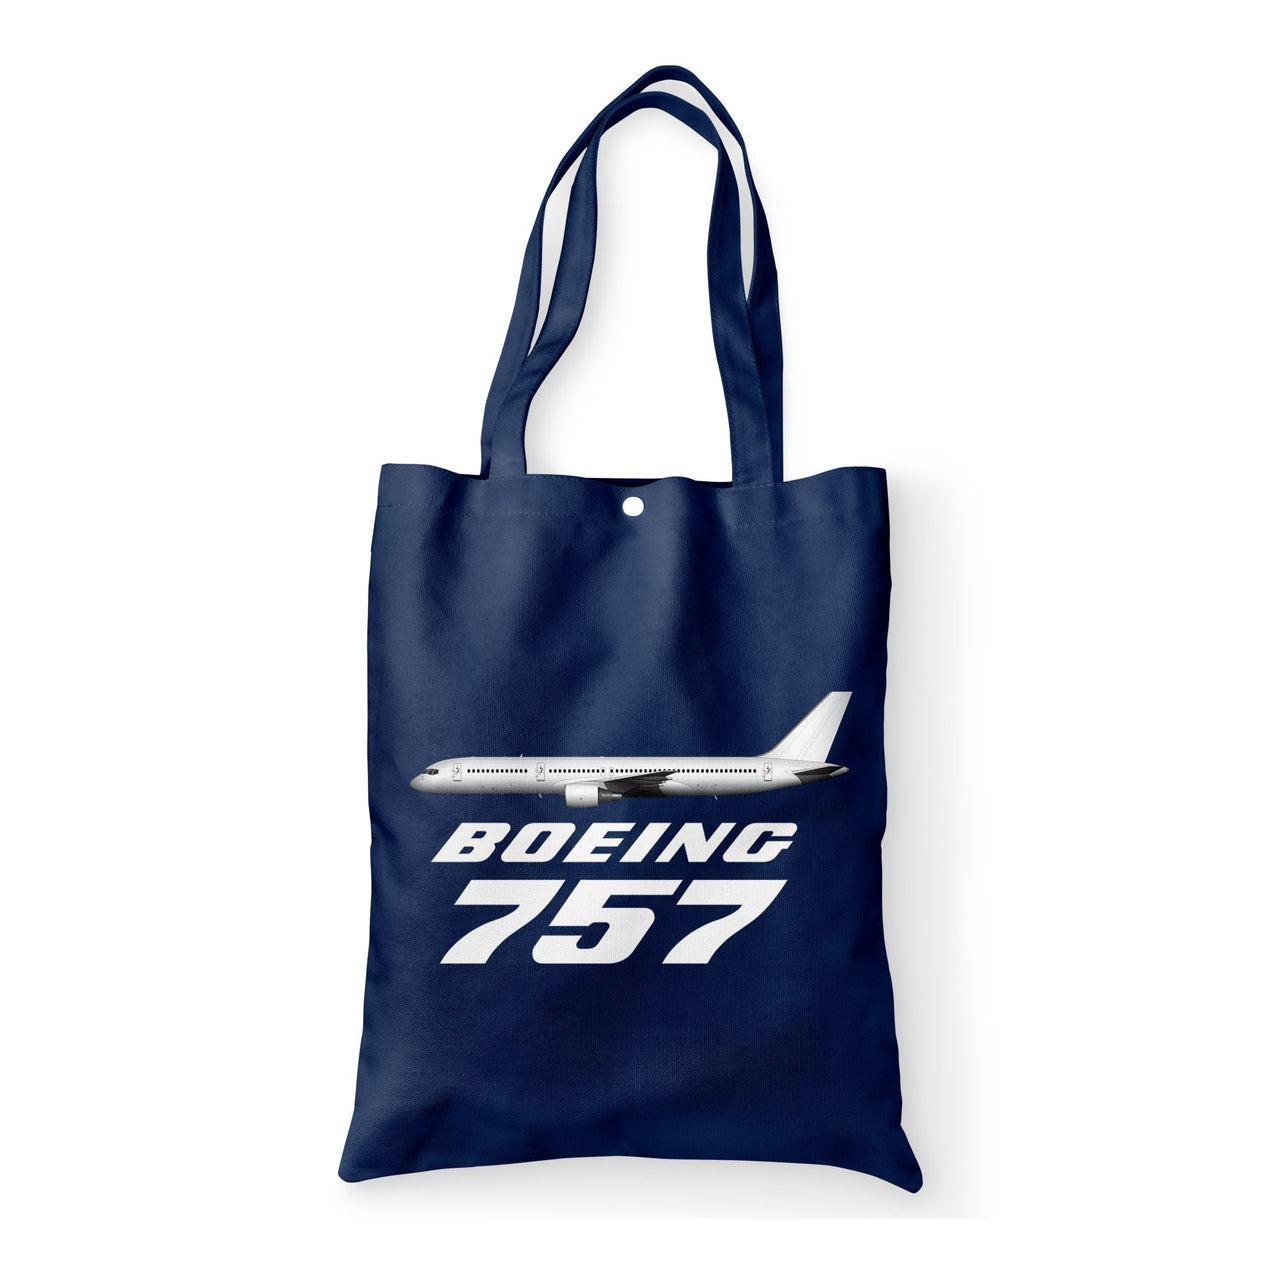 The Boeing 757 Designed Tote Bags